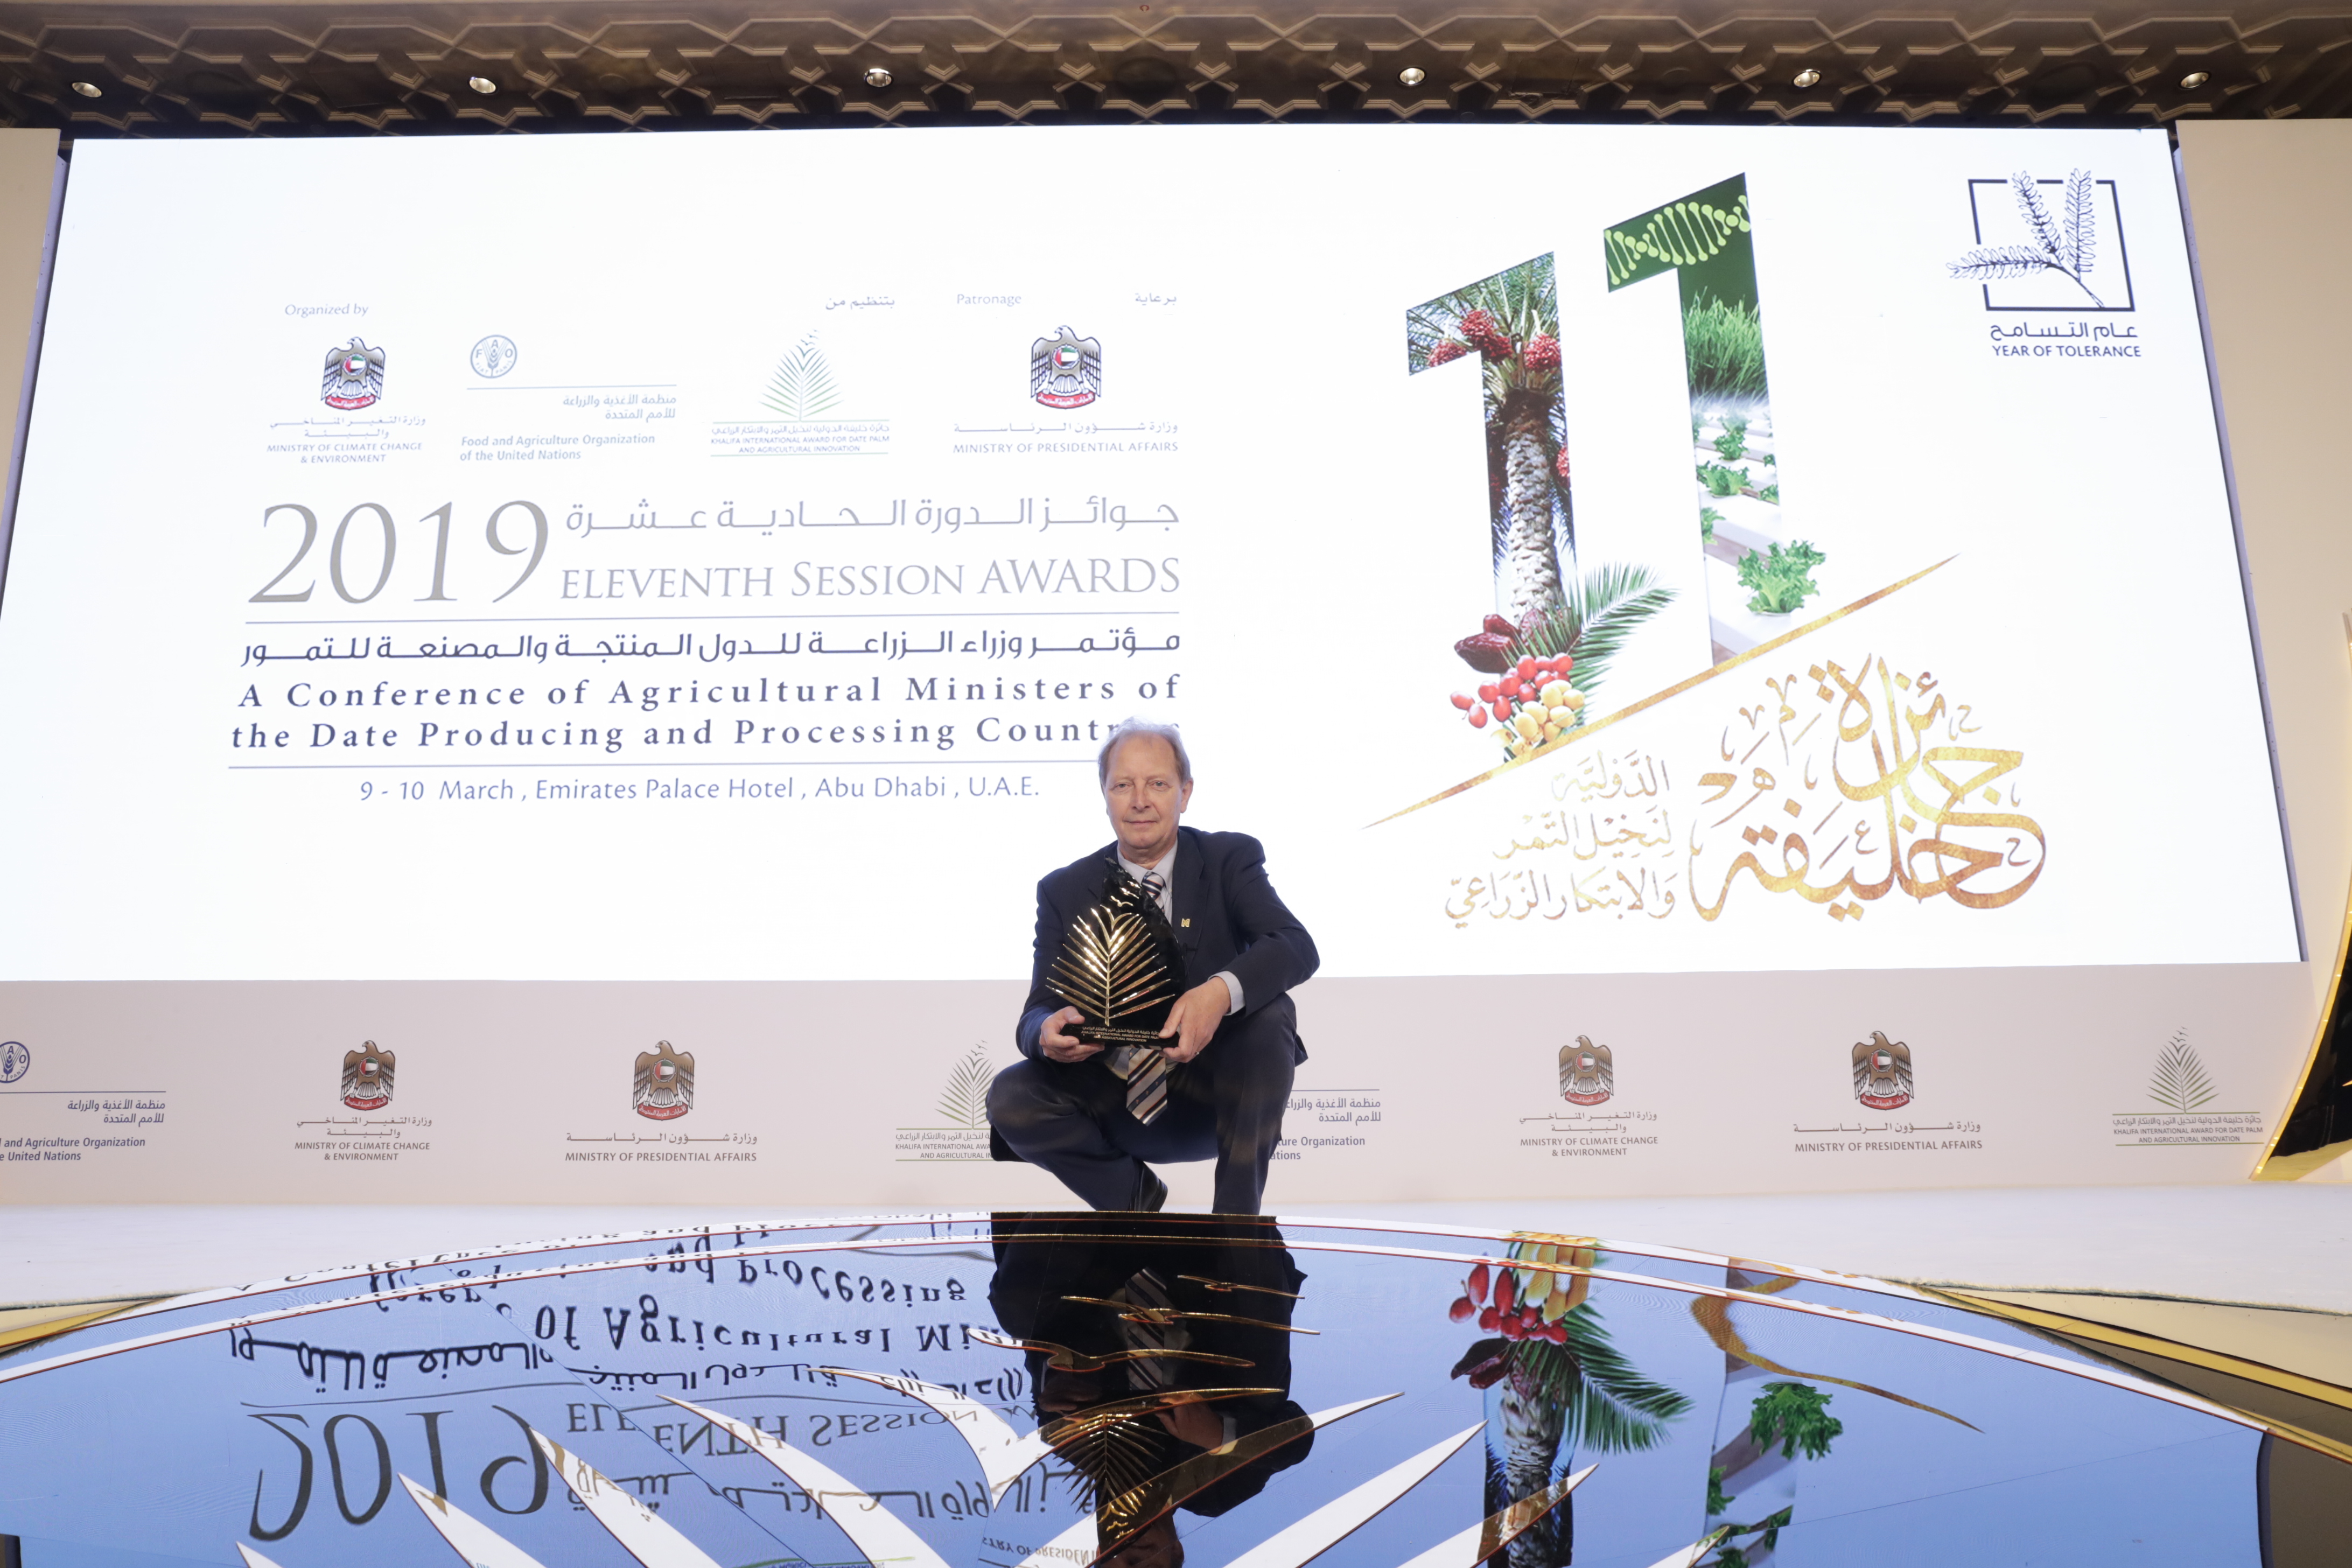 20190311-Pieter-Hoff-collects-the-prize-for-the-Khalifa-International-Date-Palm-Award-in-Abu-Dhabi